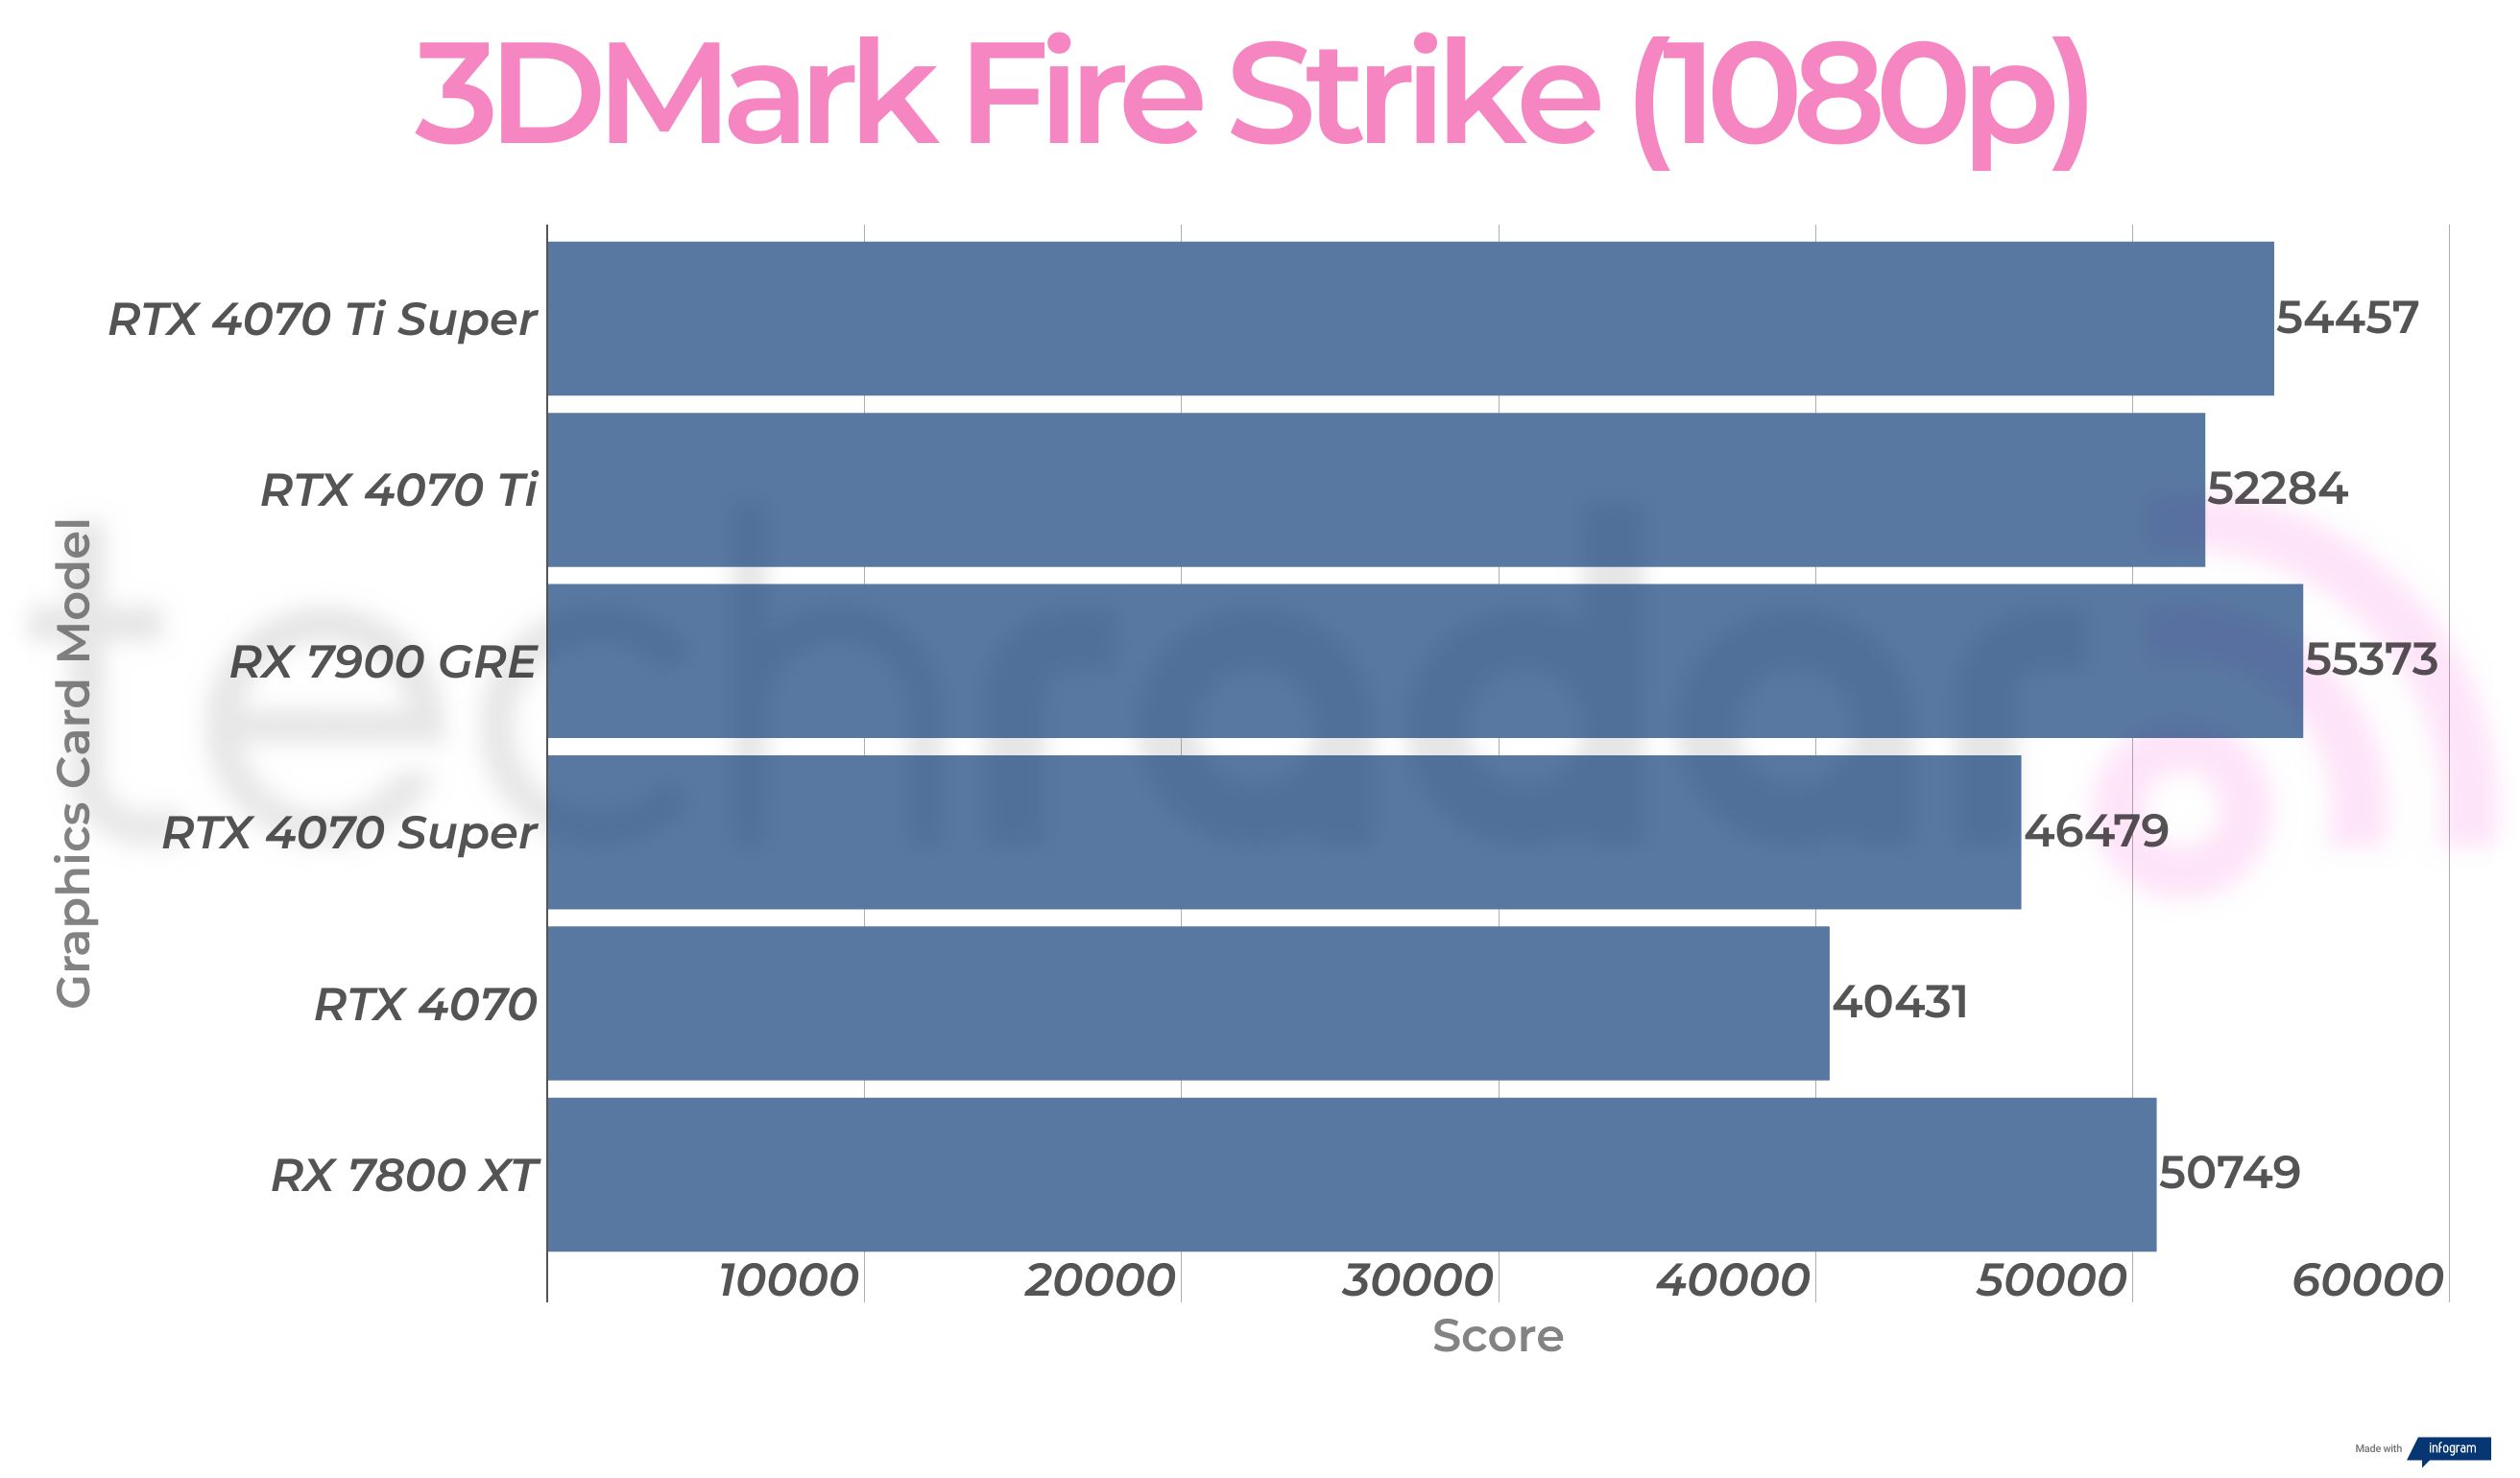 Rx 7900 GRE synthetic benchmark results